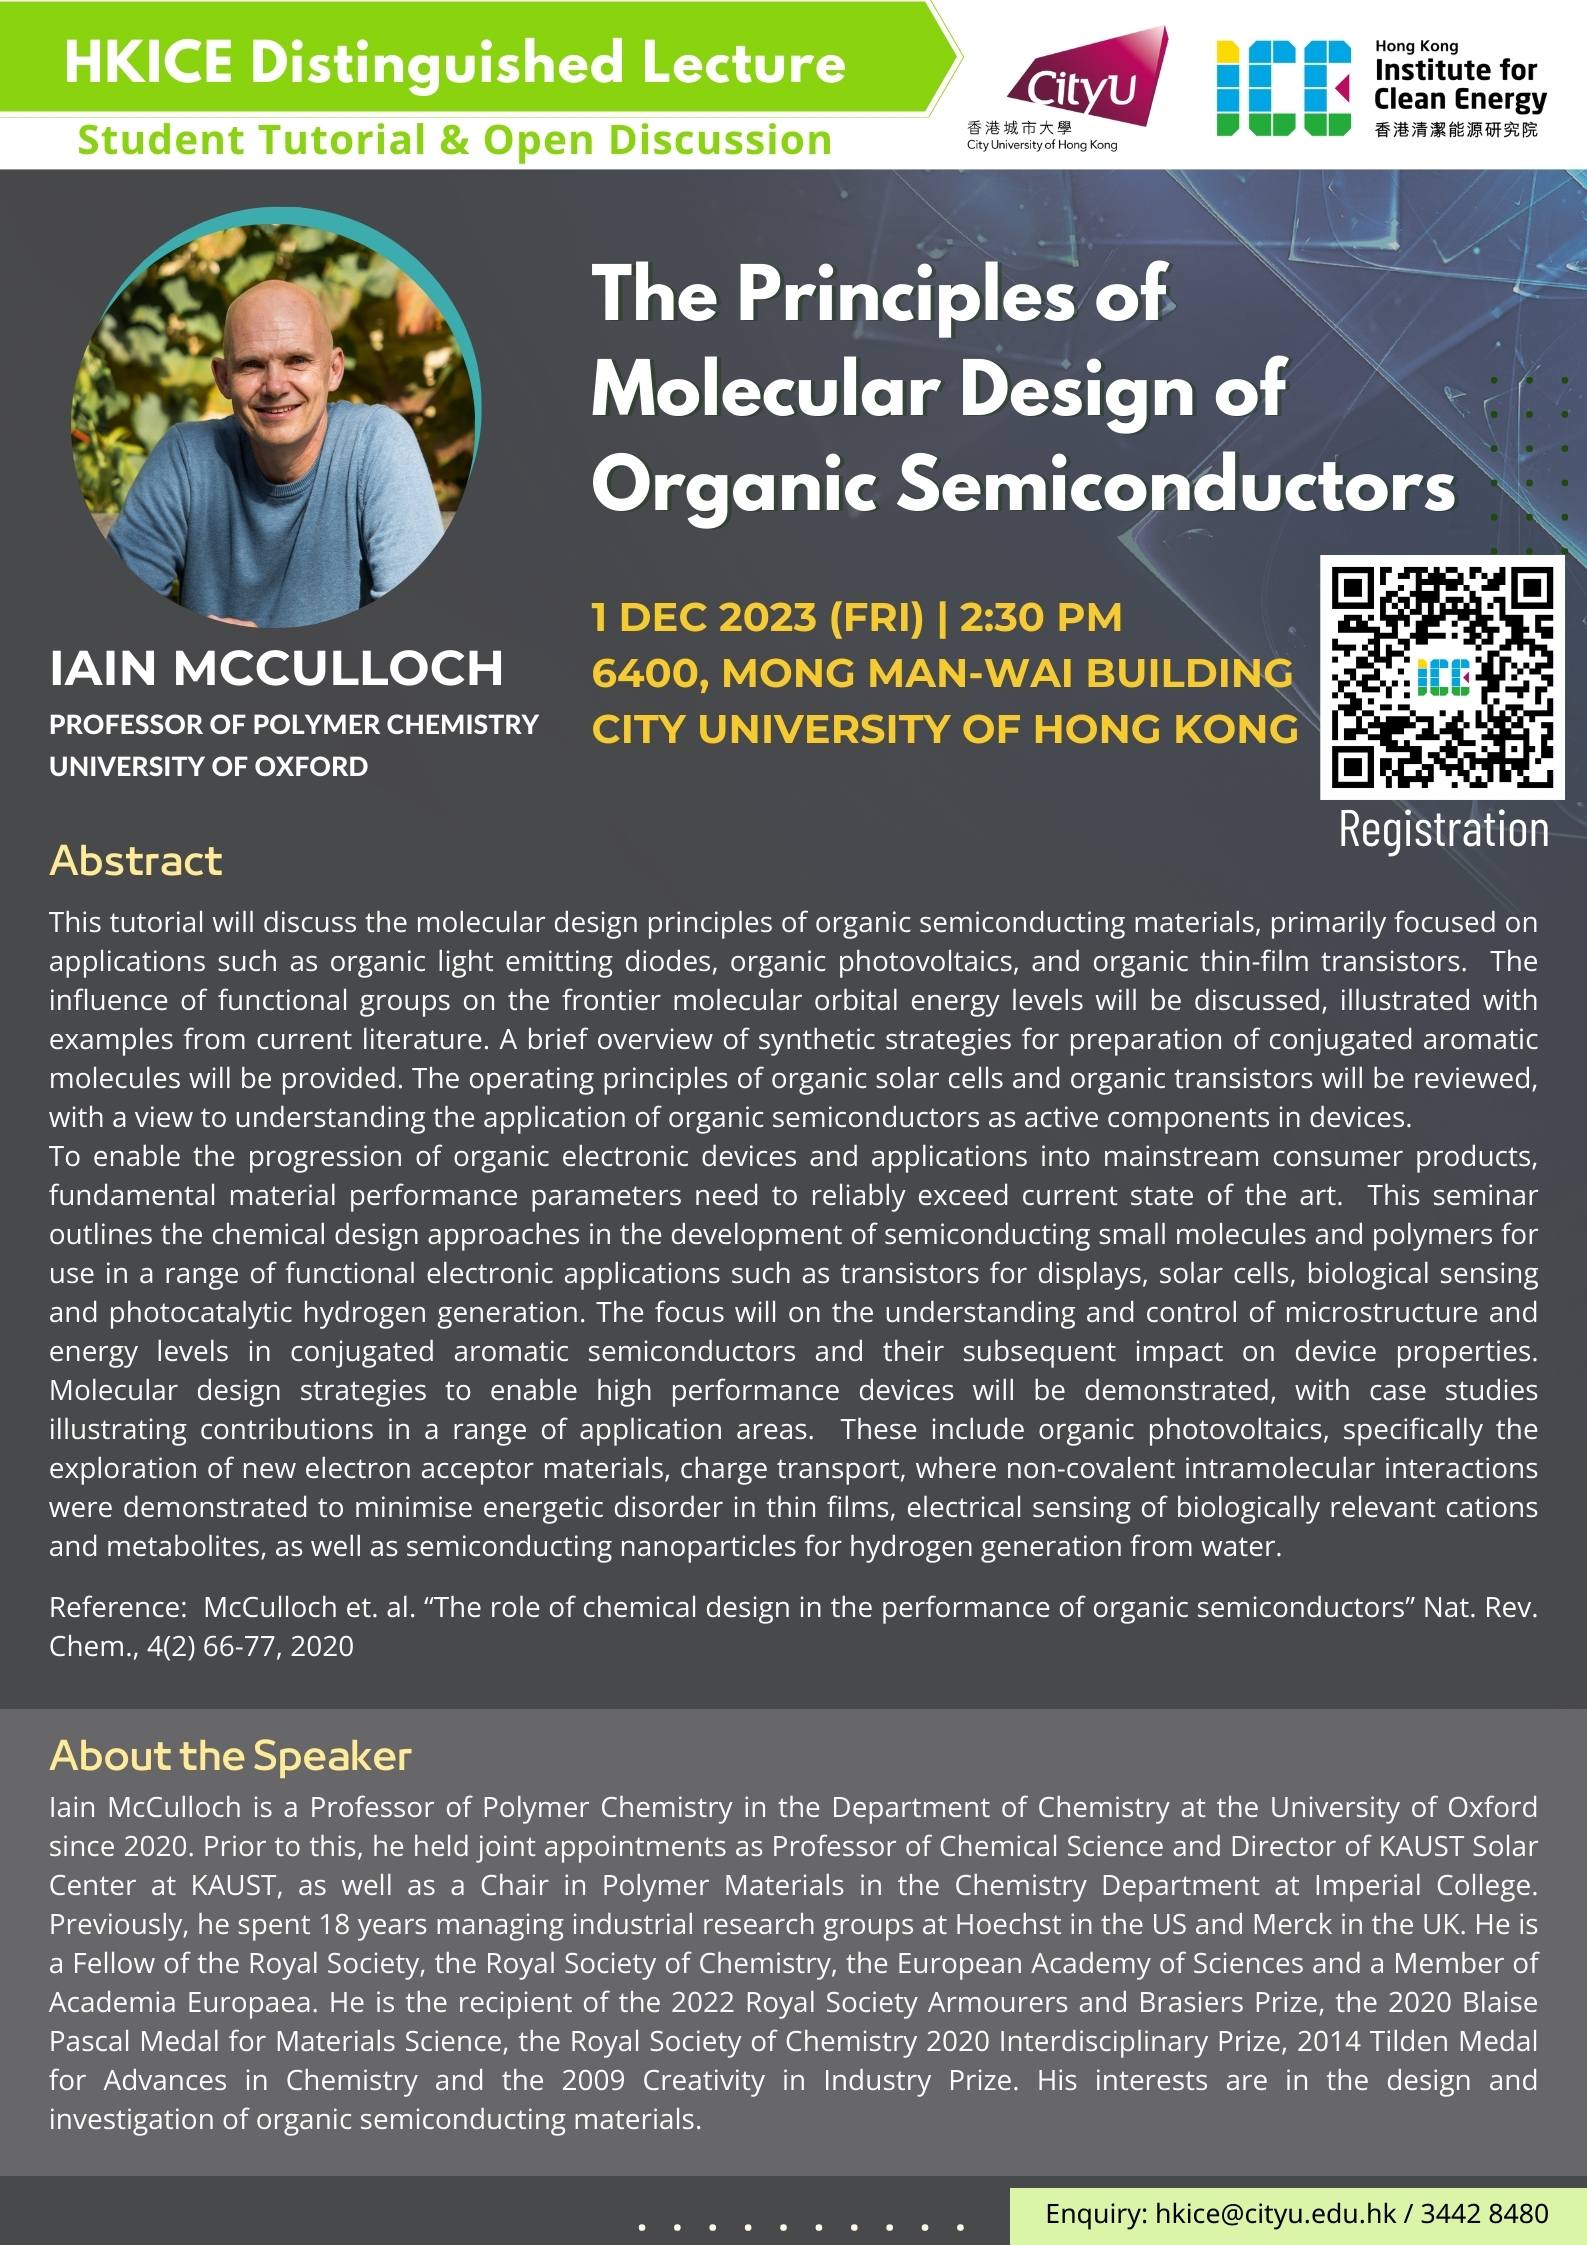 HKICE Distinguished Lecture (Student Tutorial & Open Discussion) by Prof. Iain McCulloch - 1 December 2023, 2:30pm